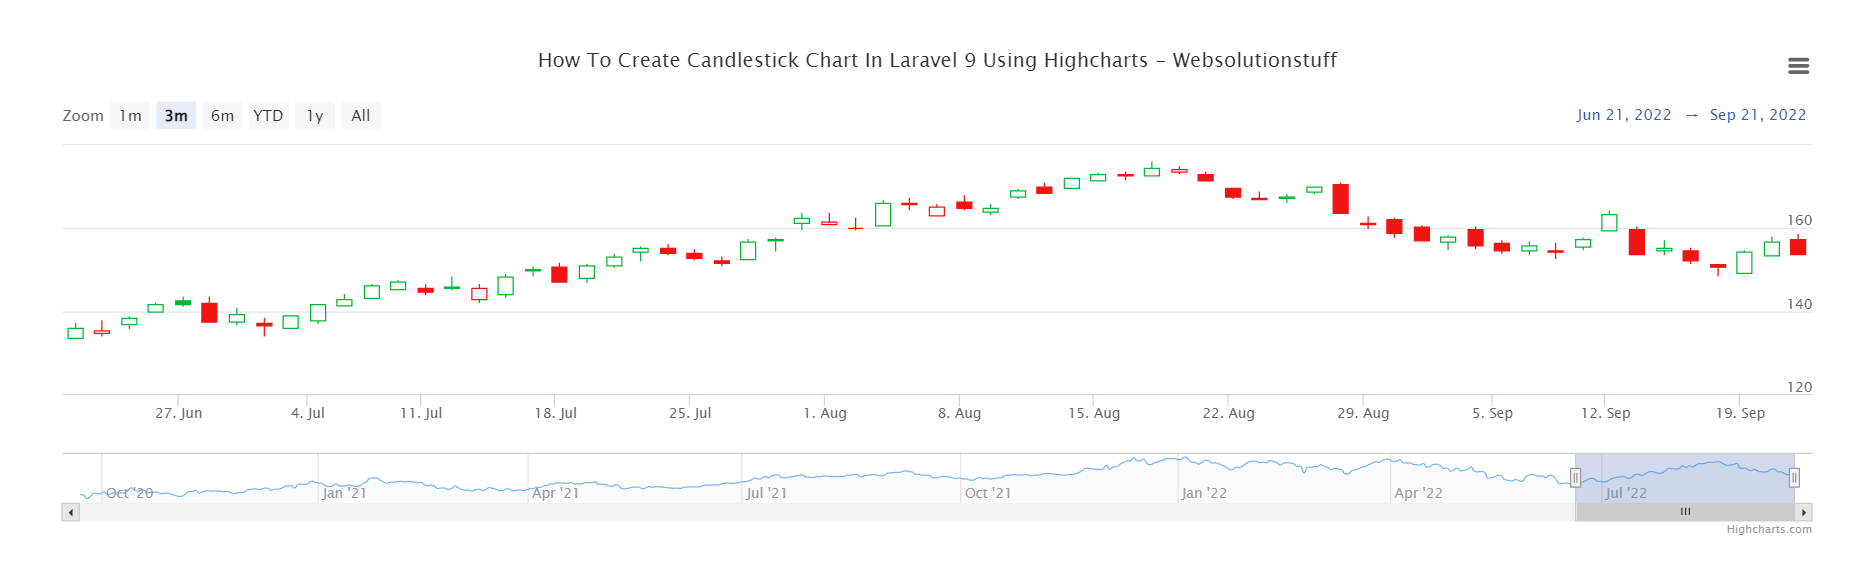 how to create candlestick chart in laravel 9 using highcharts